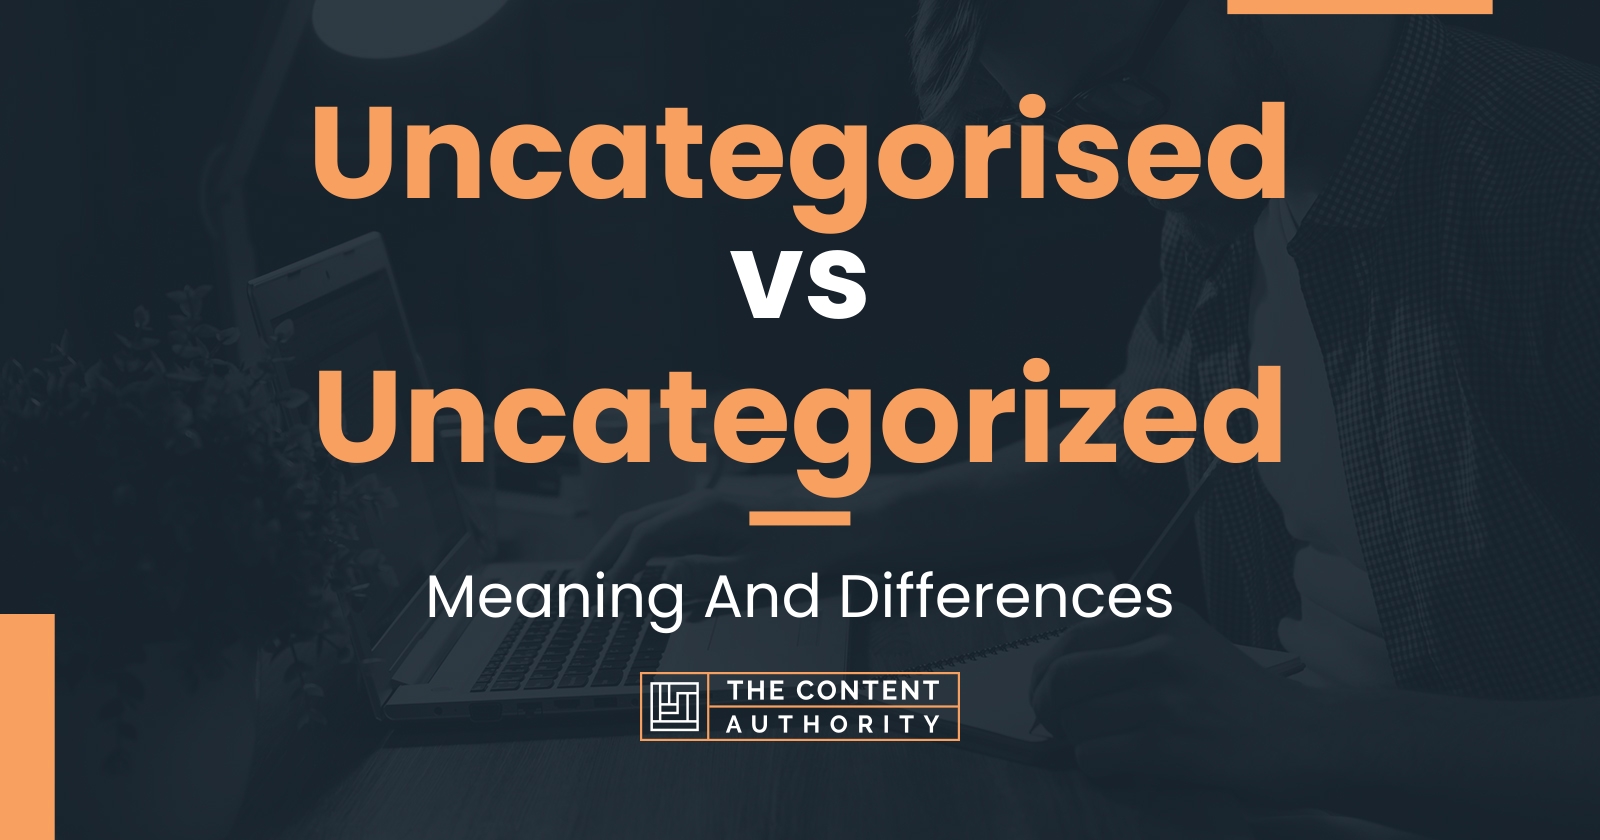 Uncategorised vs Uncategorized: Meaning And Differences